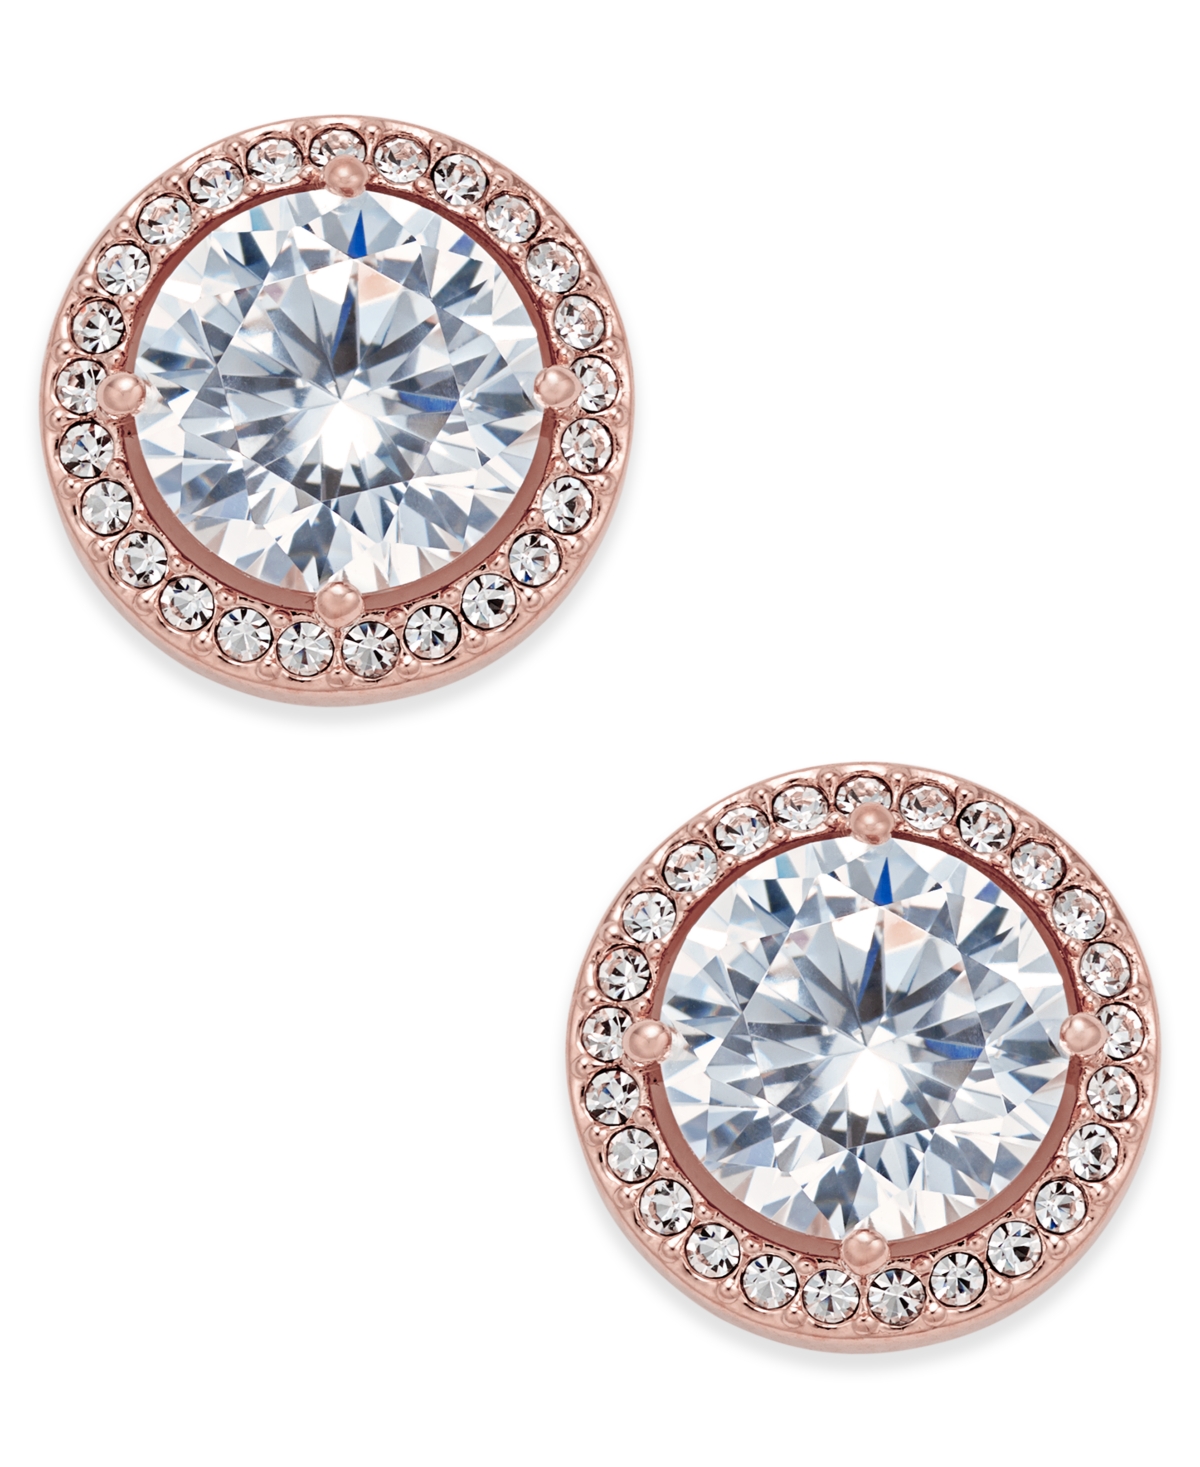 Rose Gold-Tone Crystal and Pave Round Stud Earrings, Created for Macy's - Rose Gold